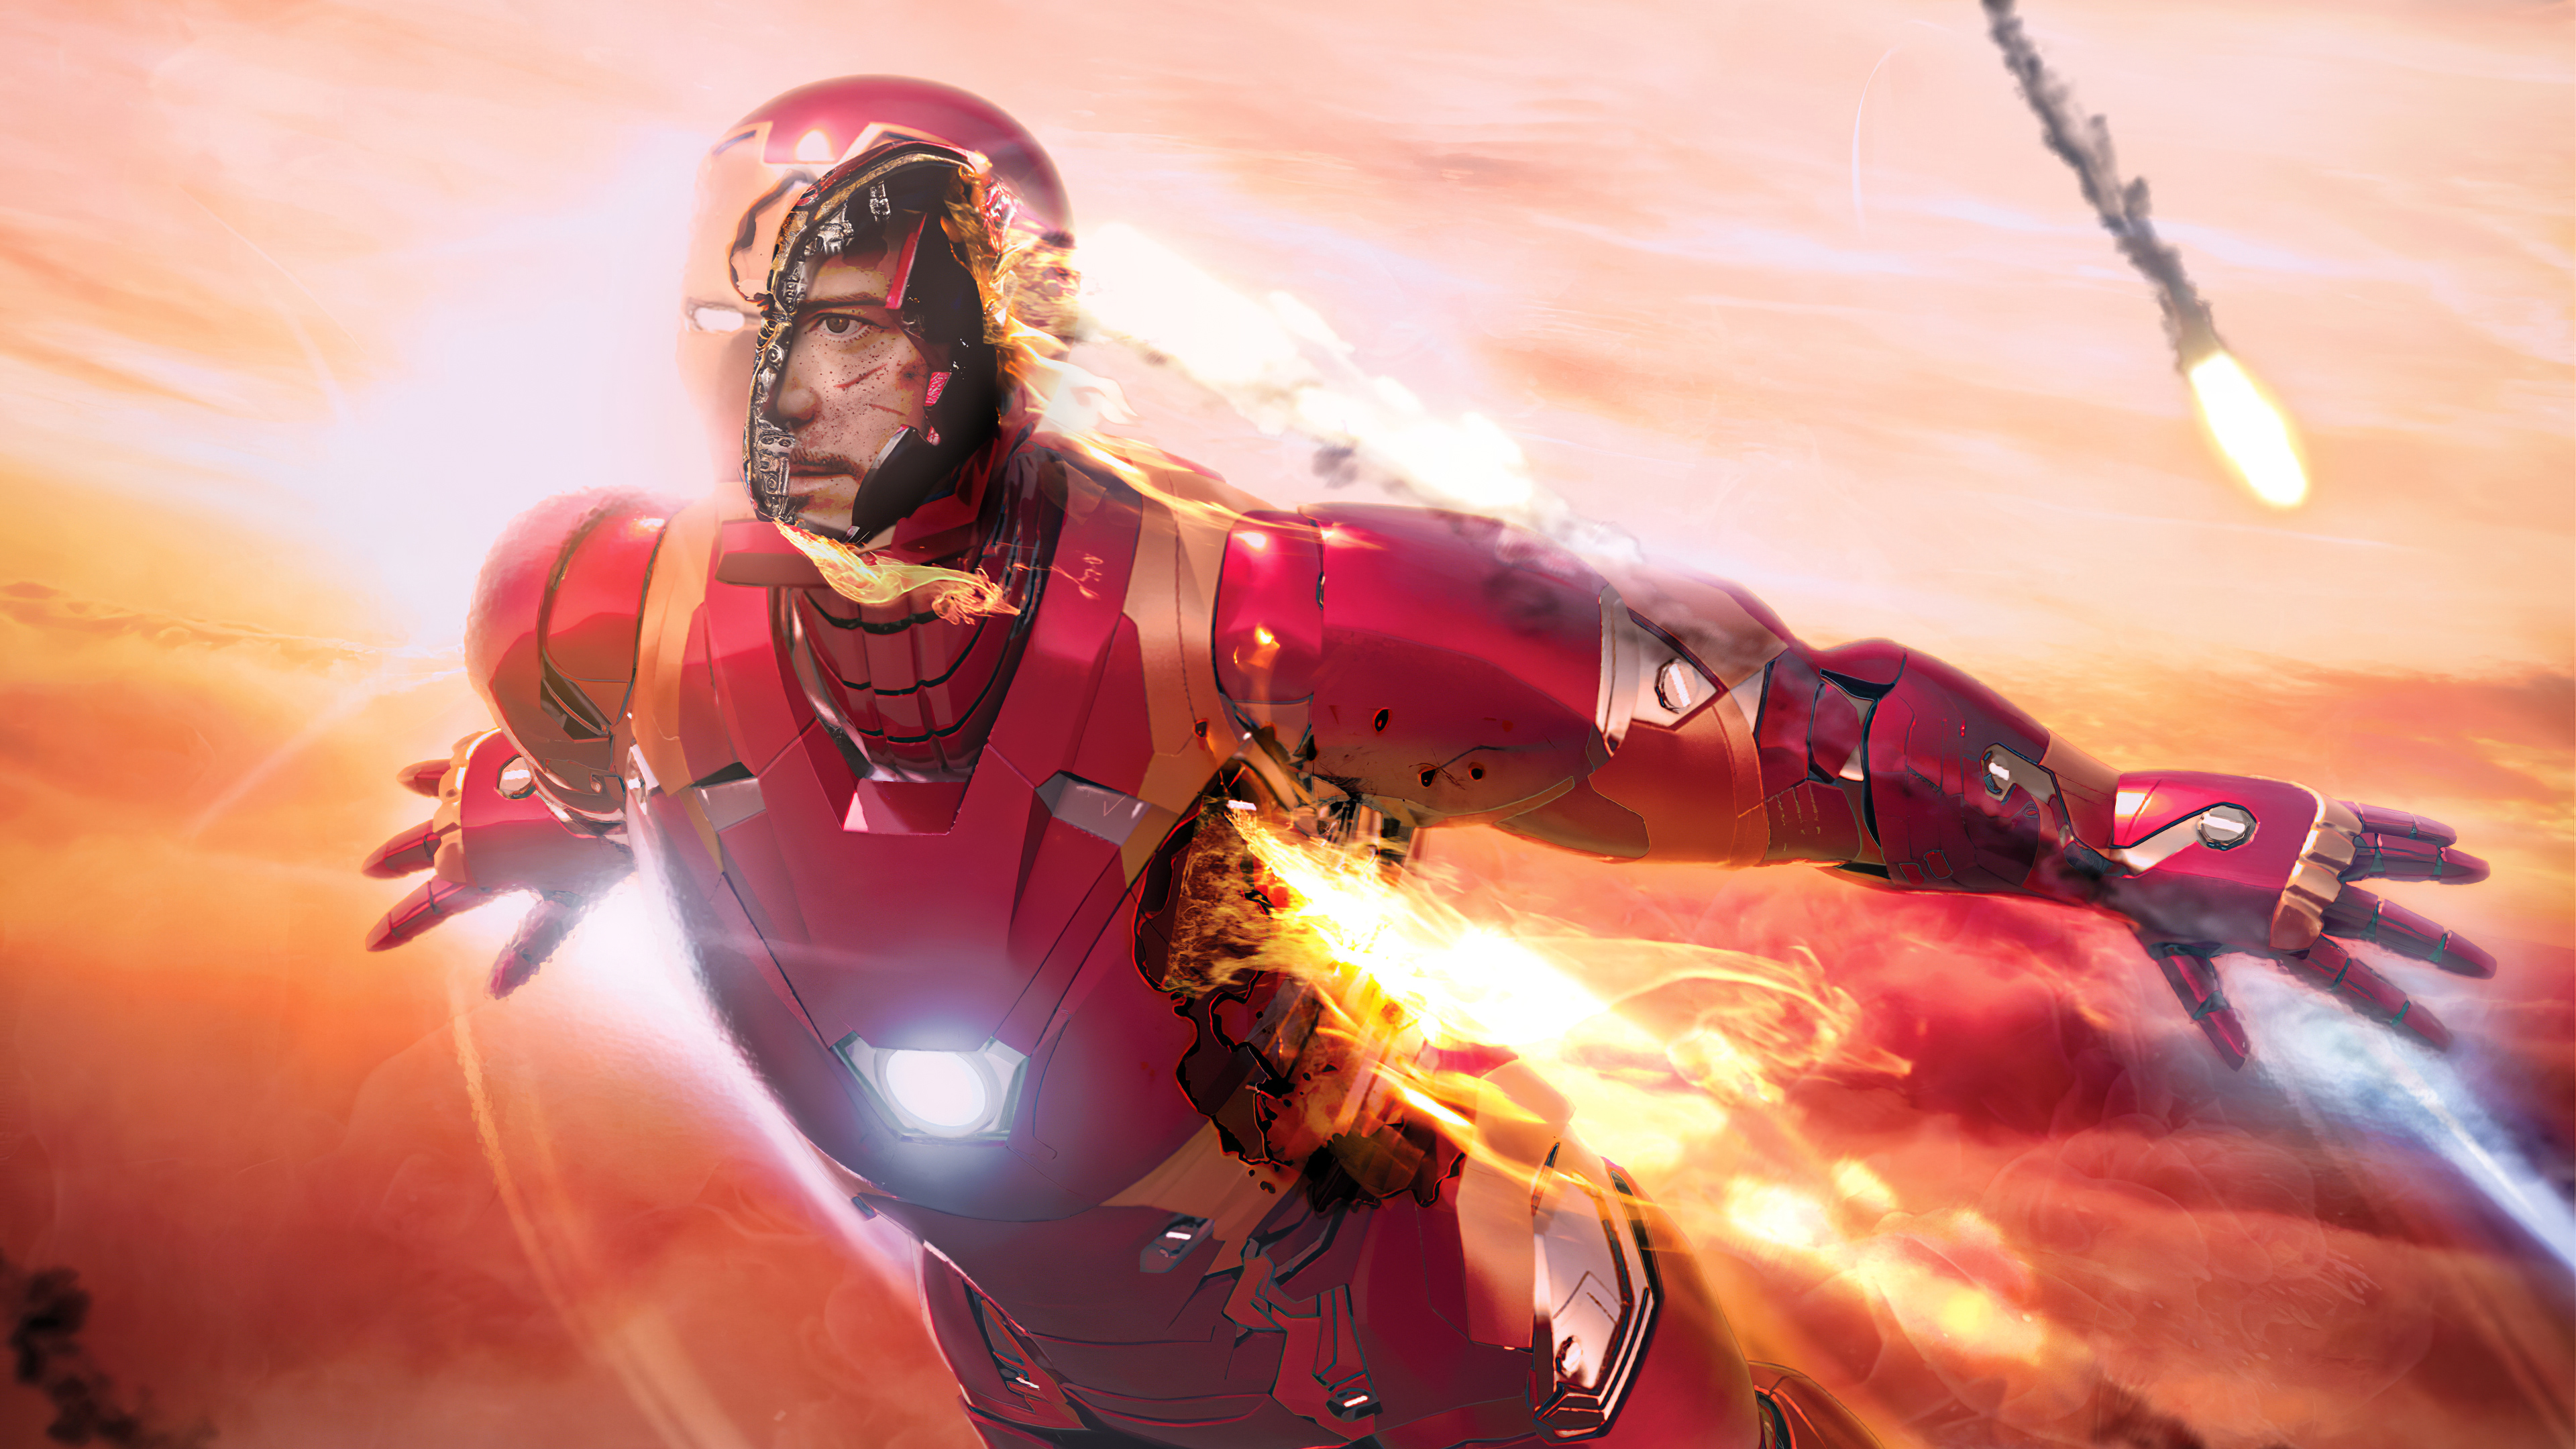 Iron Man Flying Wallpapers